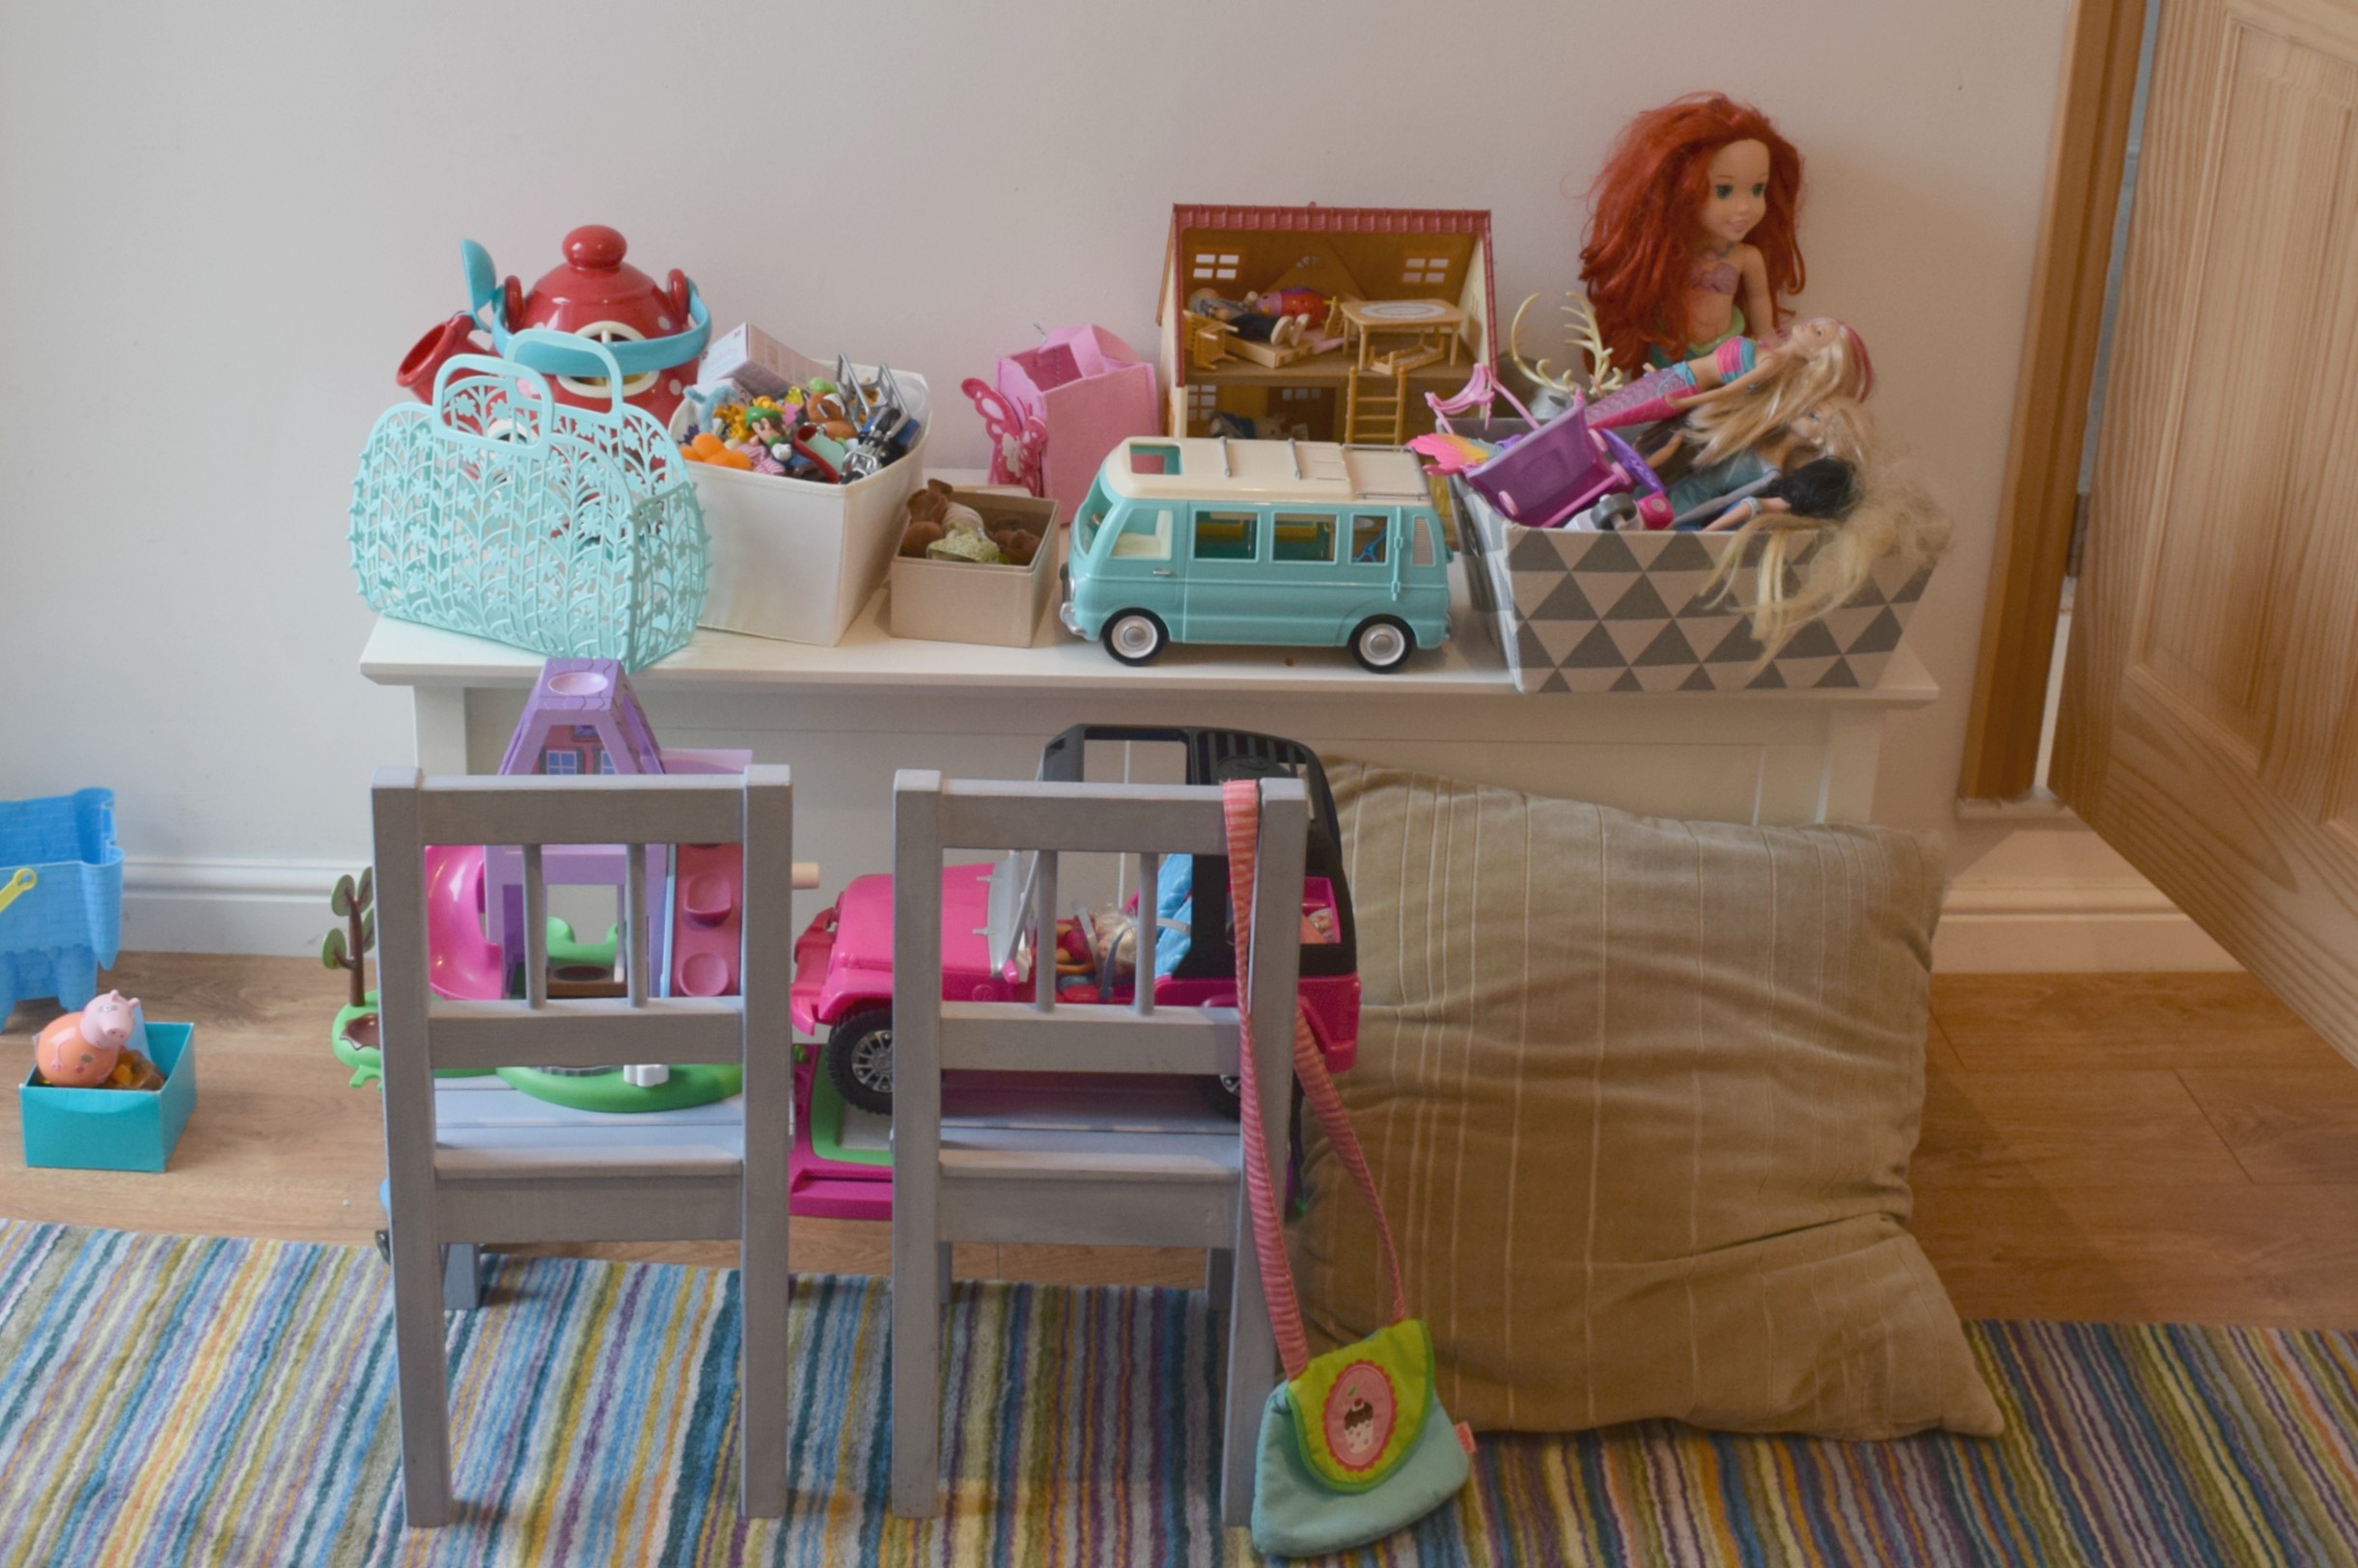 Close up of toys in playroom